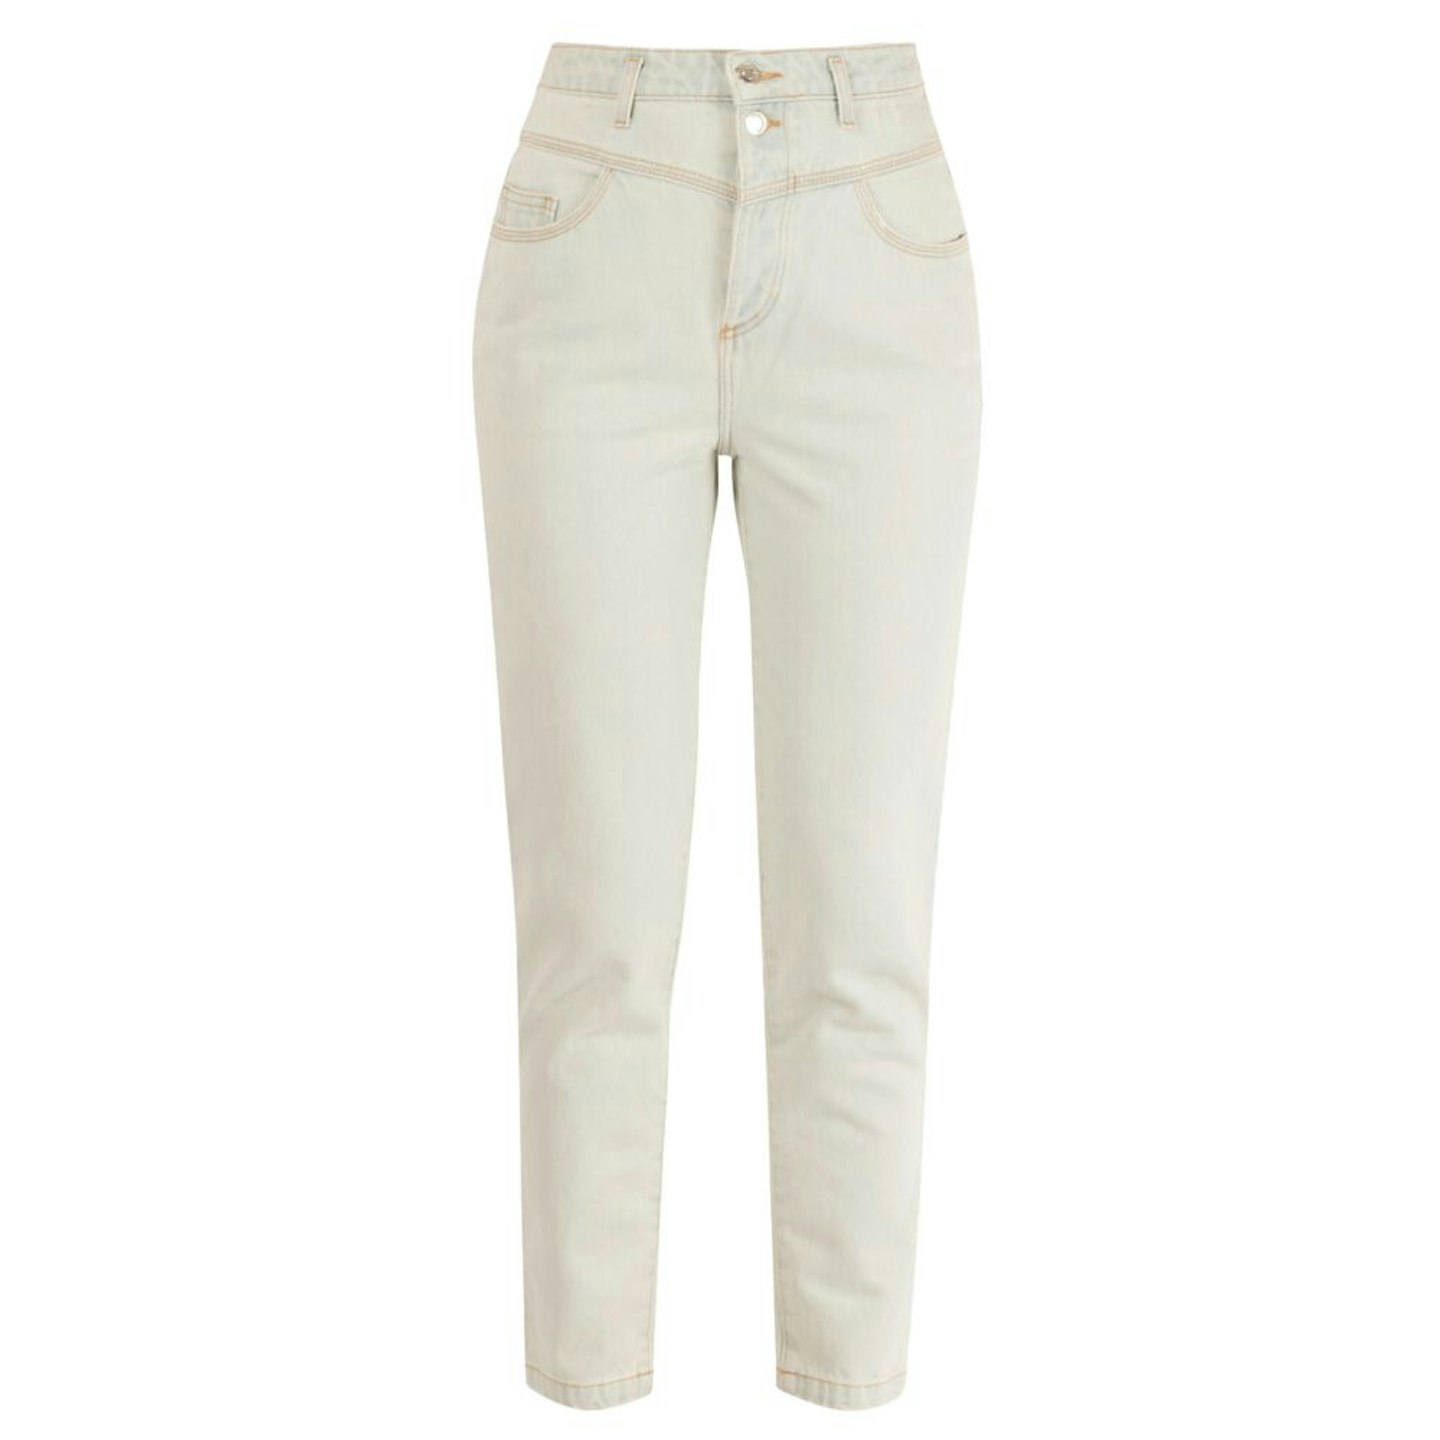 Iro, Dours Jeans, Rent From £5